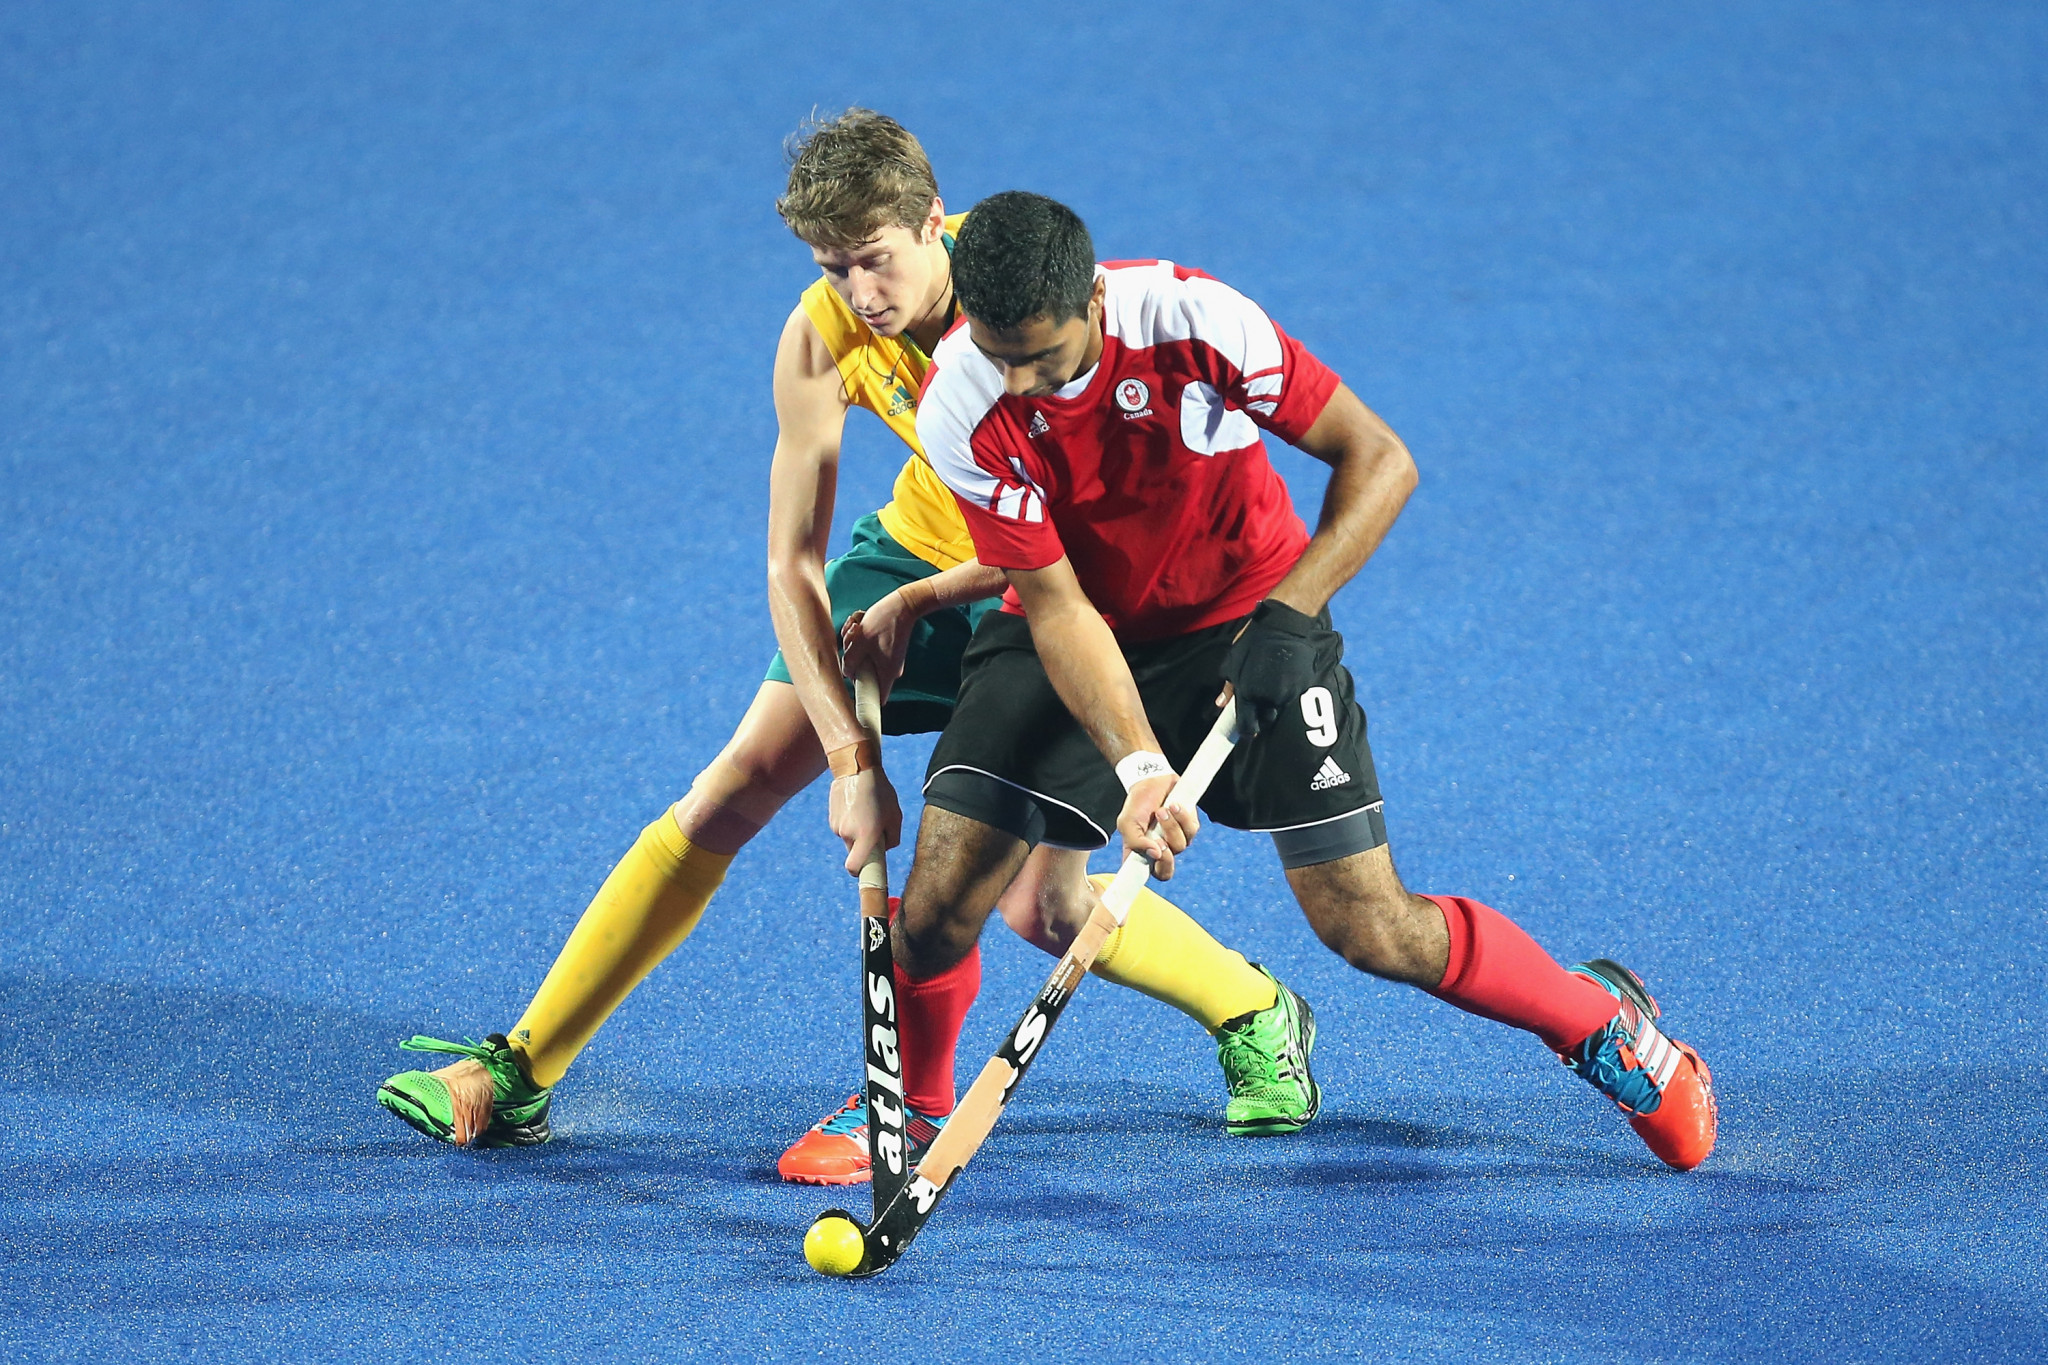 Junior captains praise Hockey5s featuring at Youth Olympic Games 